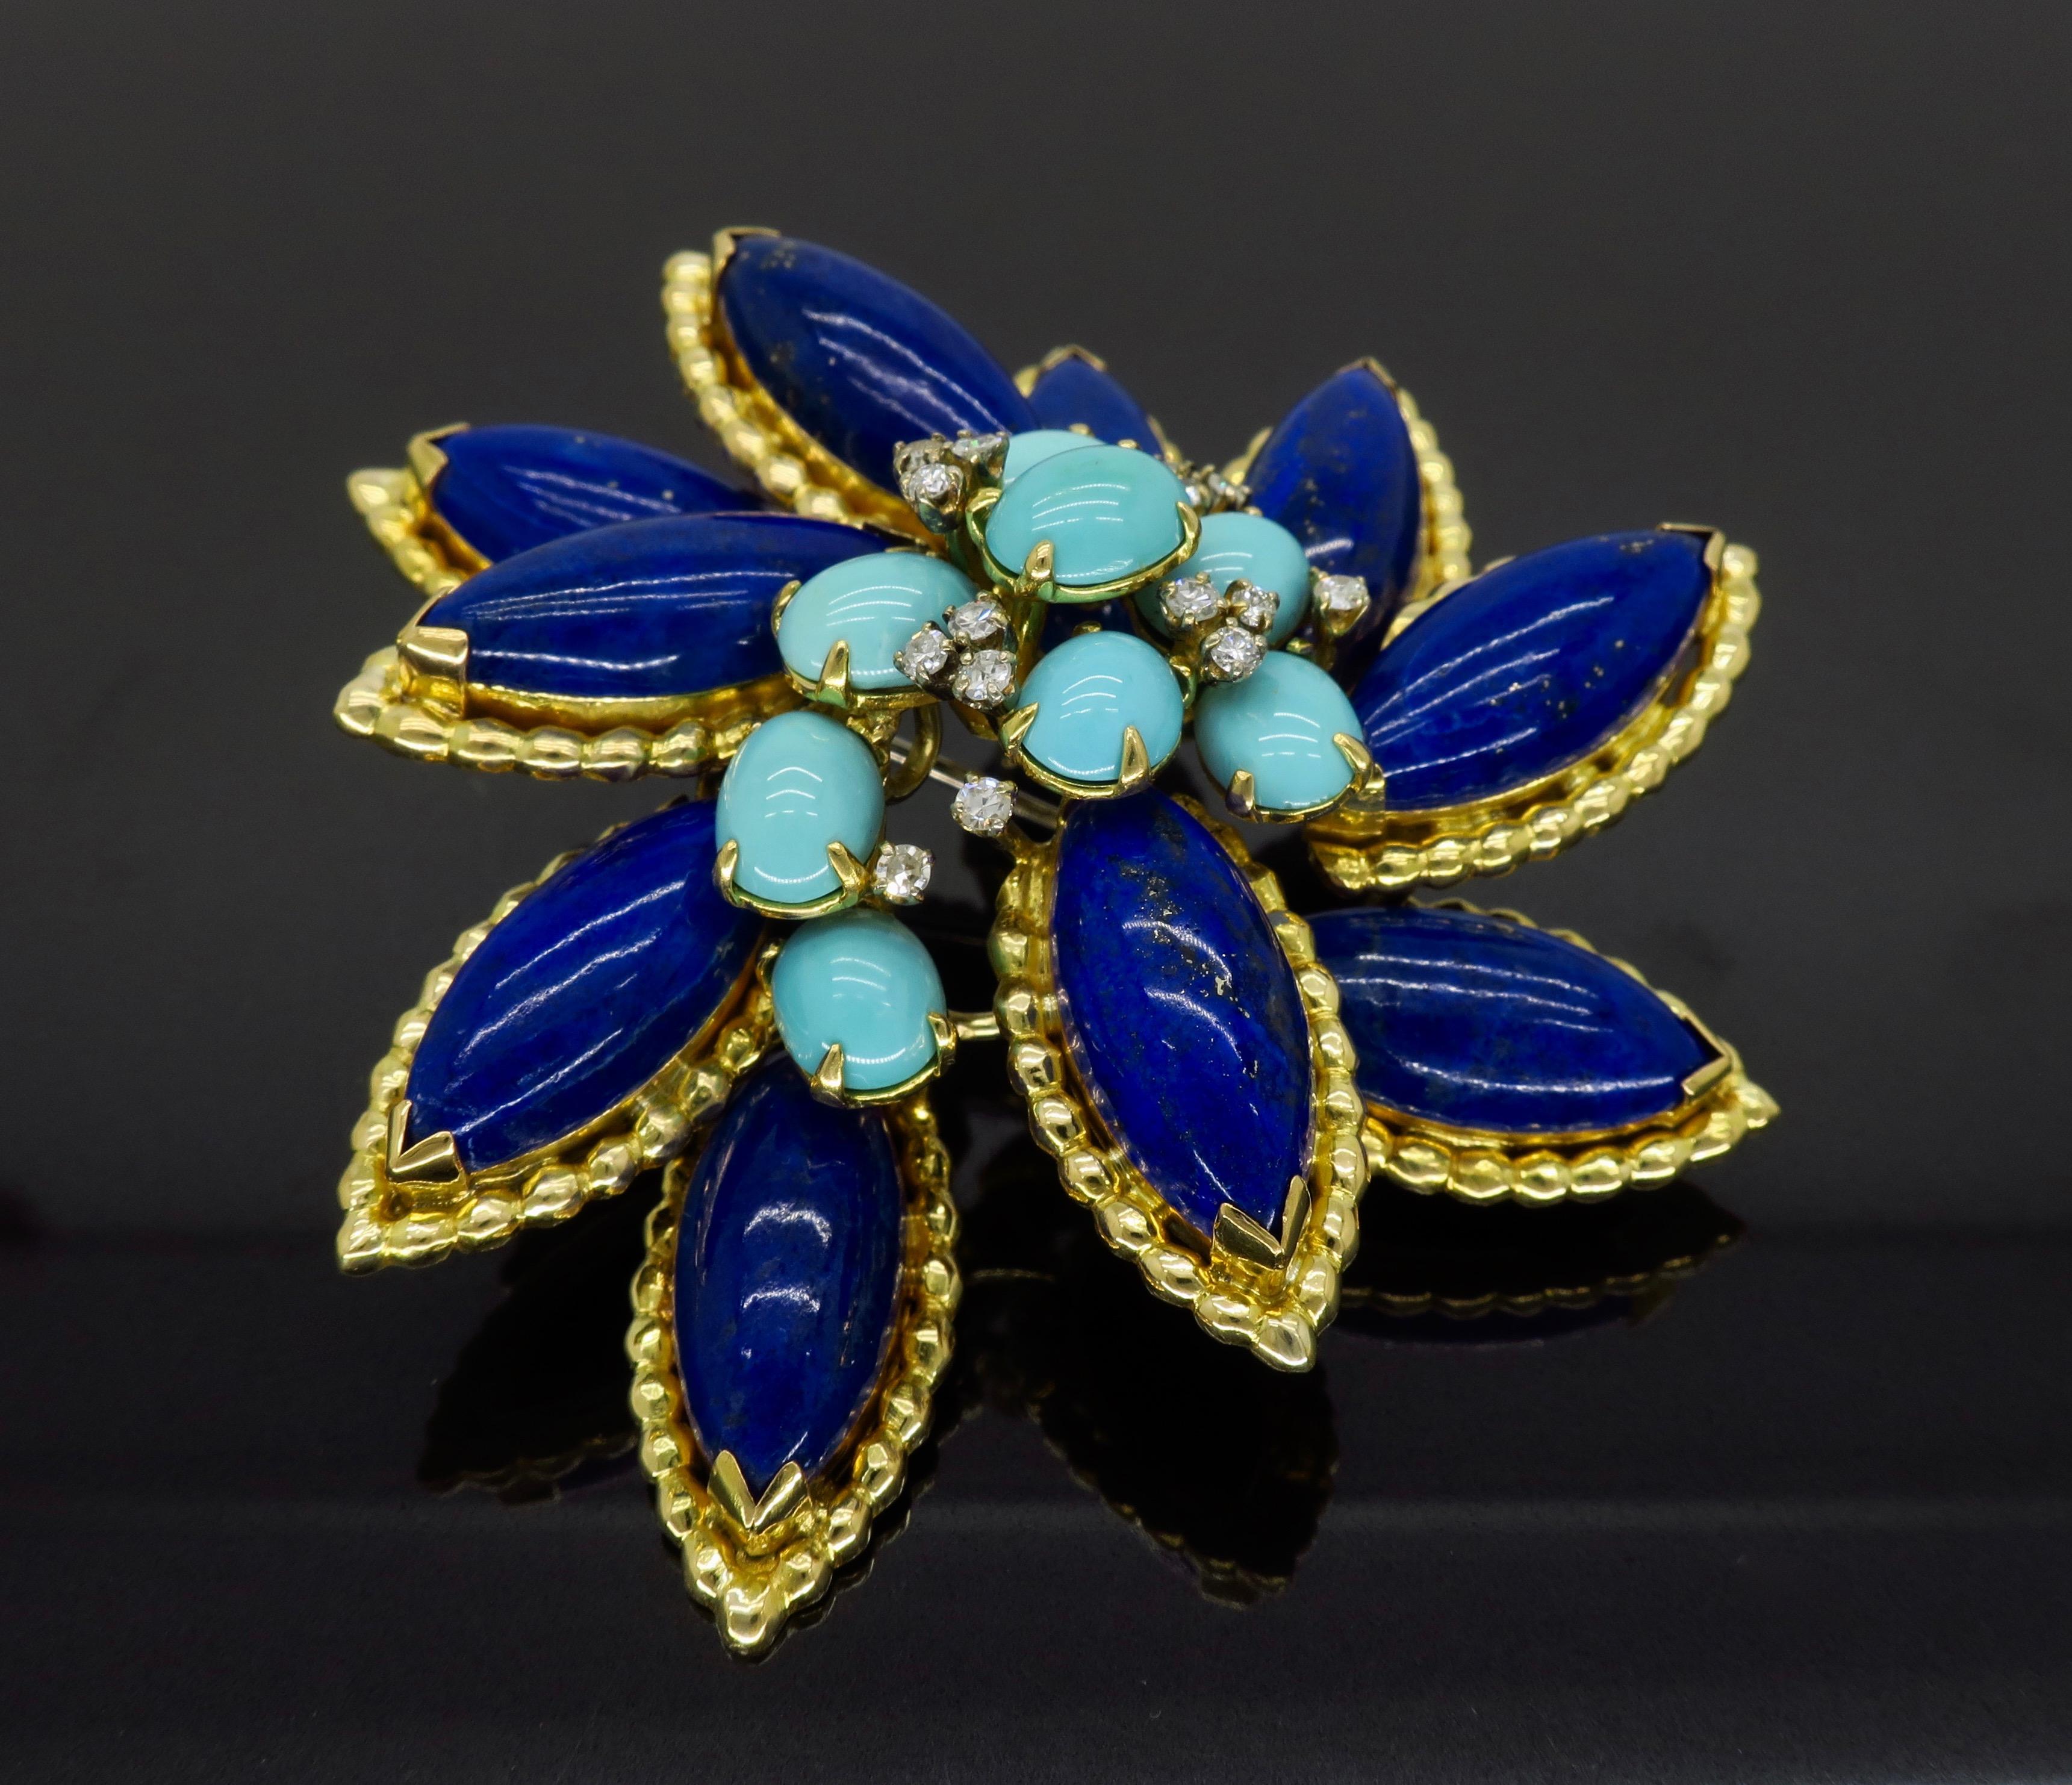 Vintage Lapis Lazuli, Turquoise and Diamond brooch that can be worn as a pendant crafted in 18k yellow gold.

Gemstone: Lapis Lazuli, Turquoise and Diamond
Gemstone Carat Weight: 10 marquise shaped Lapis Lazuli measuring approximately 18x8mm, 8 oval